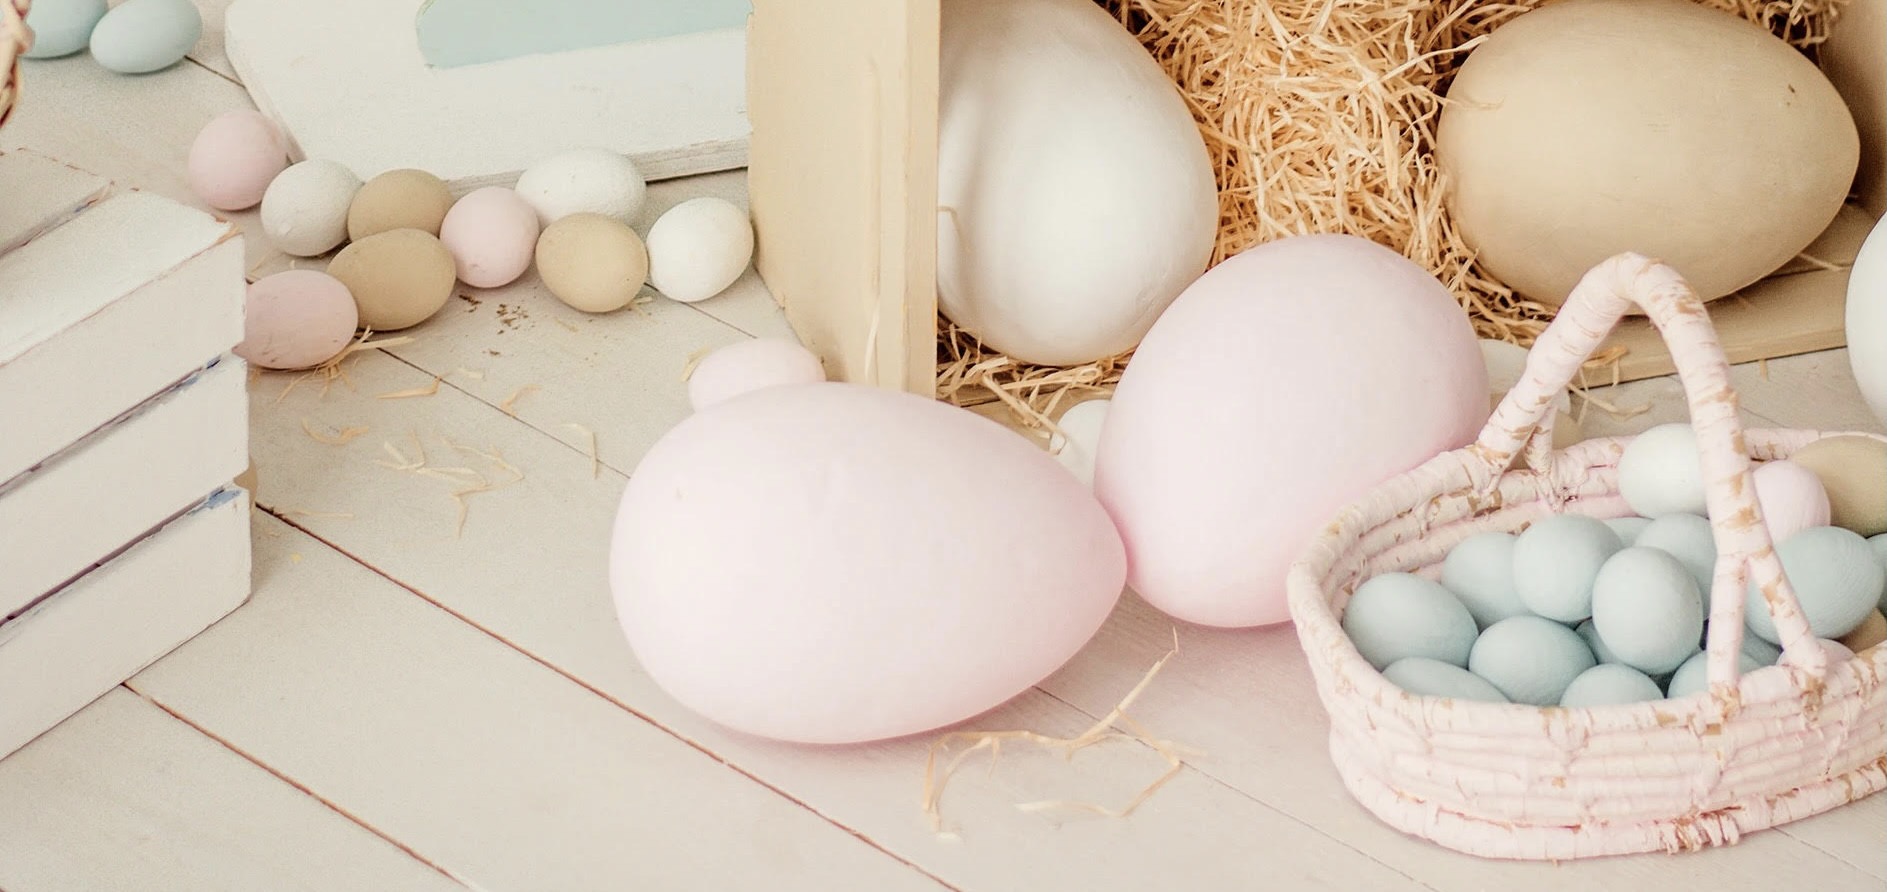 6 Tips to Make Easter Fun in Sobriety